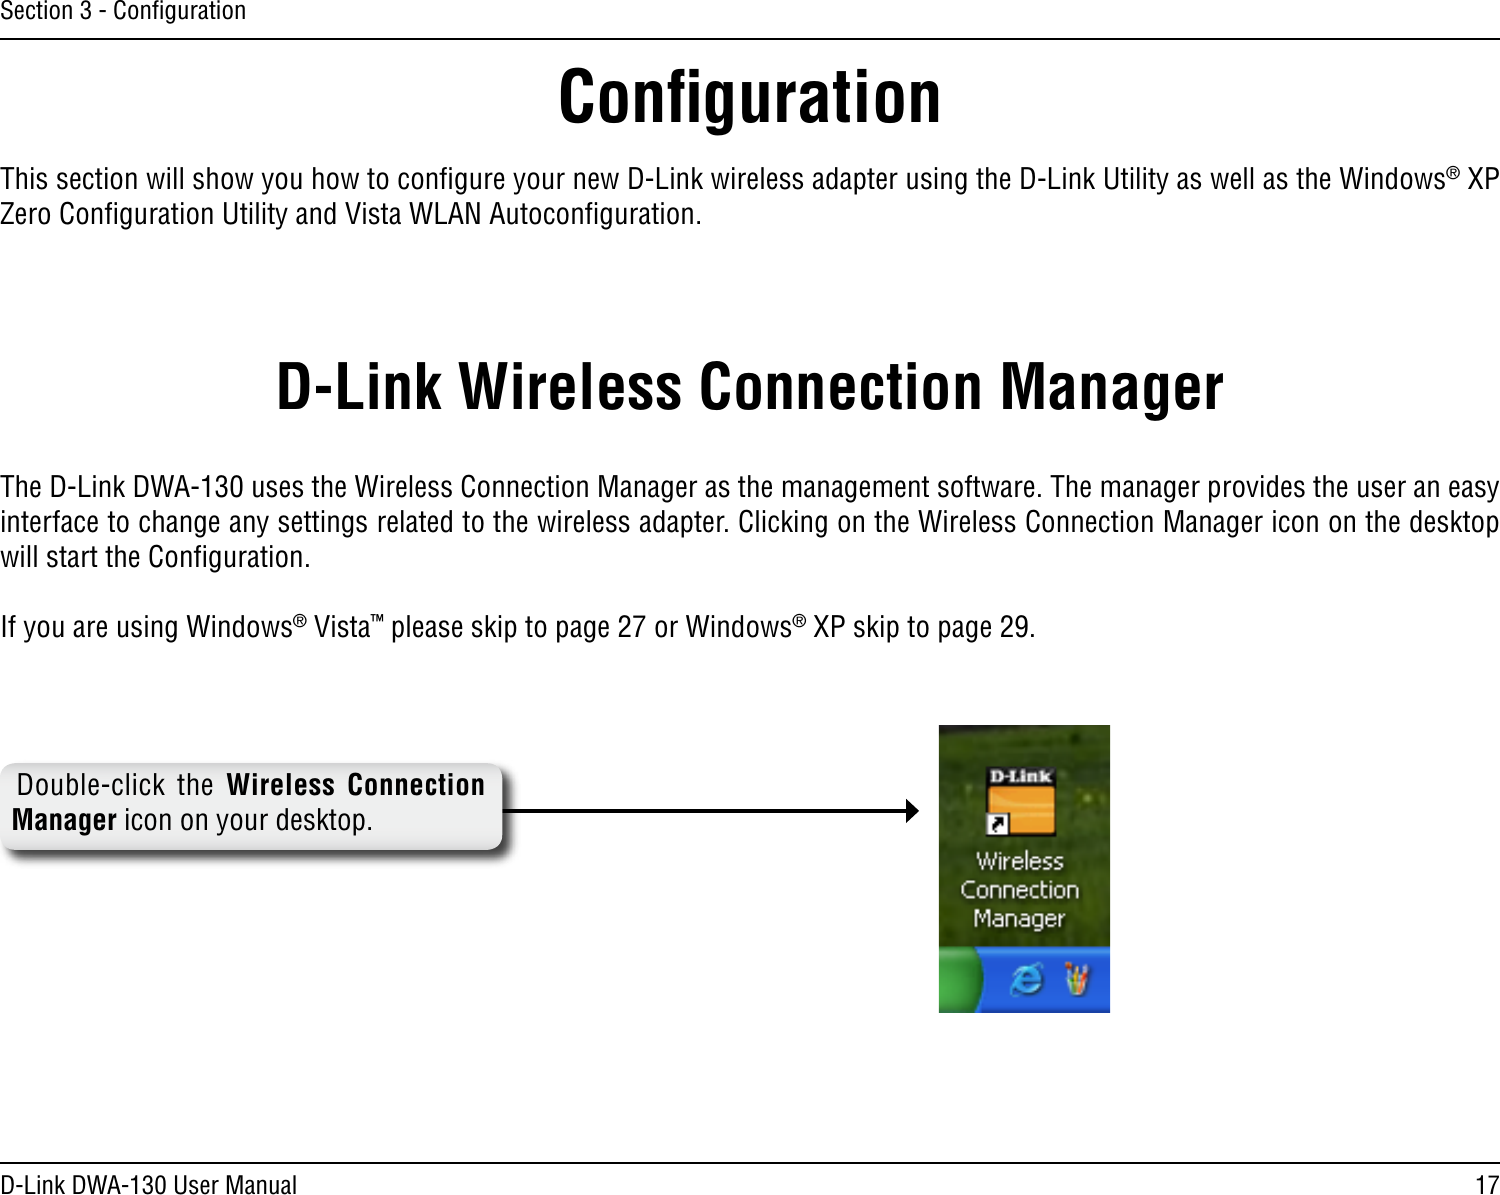 17D-Link DWA-130 User ManualSection 3 - ConﬁgurationConﬁgurationThis section will show you how to conﬁgure your new D-Link wireless adapter using the D-Link Utility as well as the Windows® XP Zero Conﬁguration Utility and Vista WLAN Autoconﬁguration.D-Link Wireless Connection ManagerThe D-Link DWA-130 uses the Wireless Connection Manager as the management software. The manager provides the user an easy interface to change any settings related to the wireless adapter. Clicking on the Wireless Connection Manager icon on the desktop will start the Conﬁguration.If you are using Windows® Vista™ please skip to page 27 or Windows® XP skip to page 29.Double-click  the  Wireless  Connection Manager icon on your desktop.